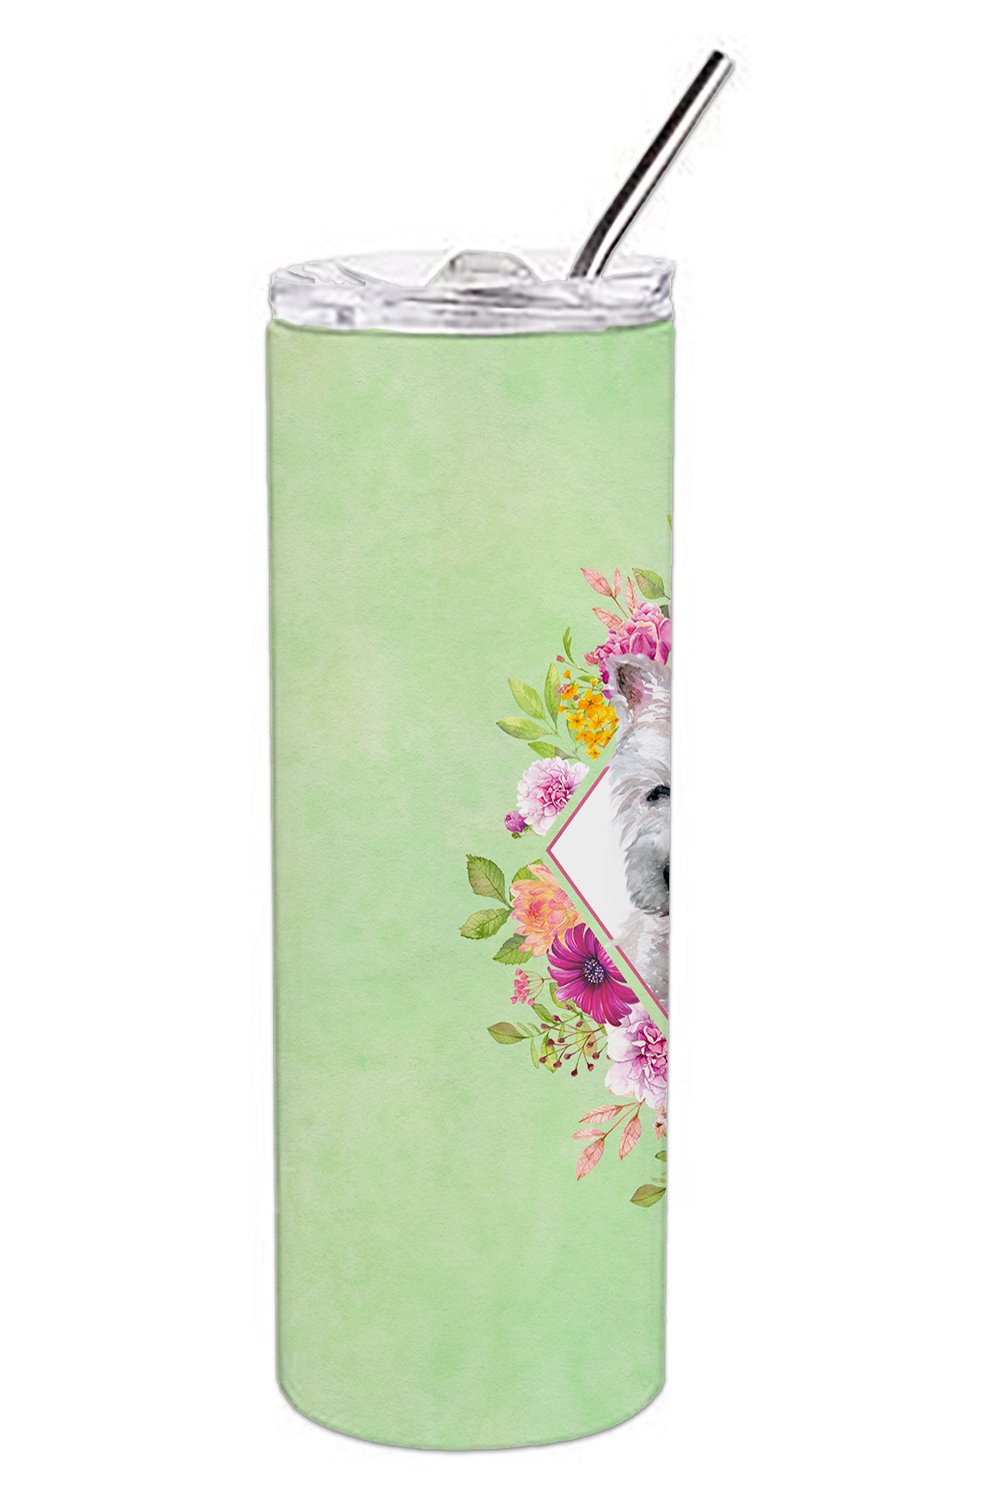 West Highland White Terrier Green Flowers Double Walled Stainless Steel 20 oz Skinny Tumbler CK4353TBL20 by Caroline's Treasures